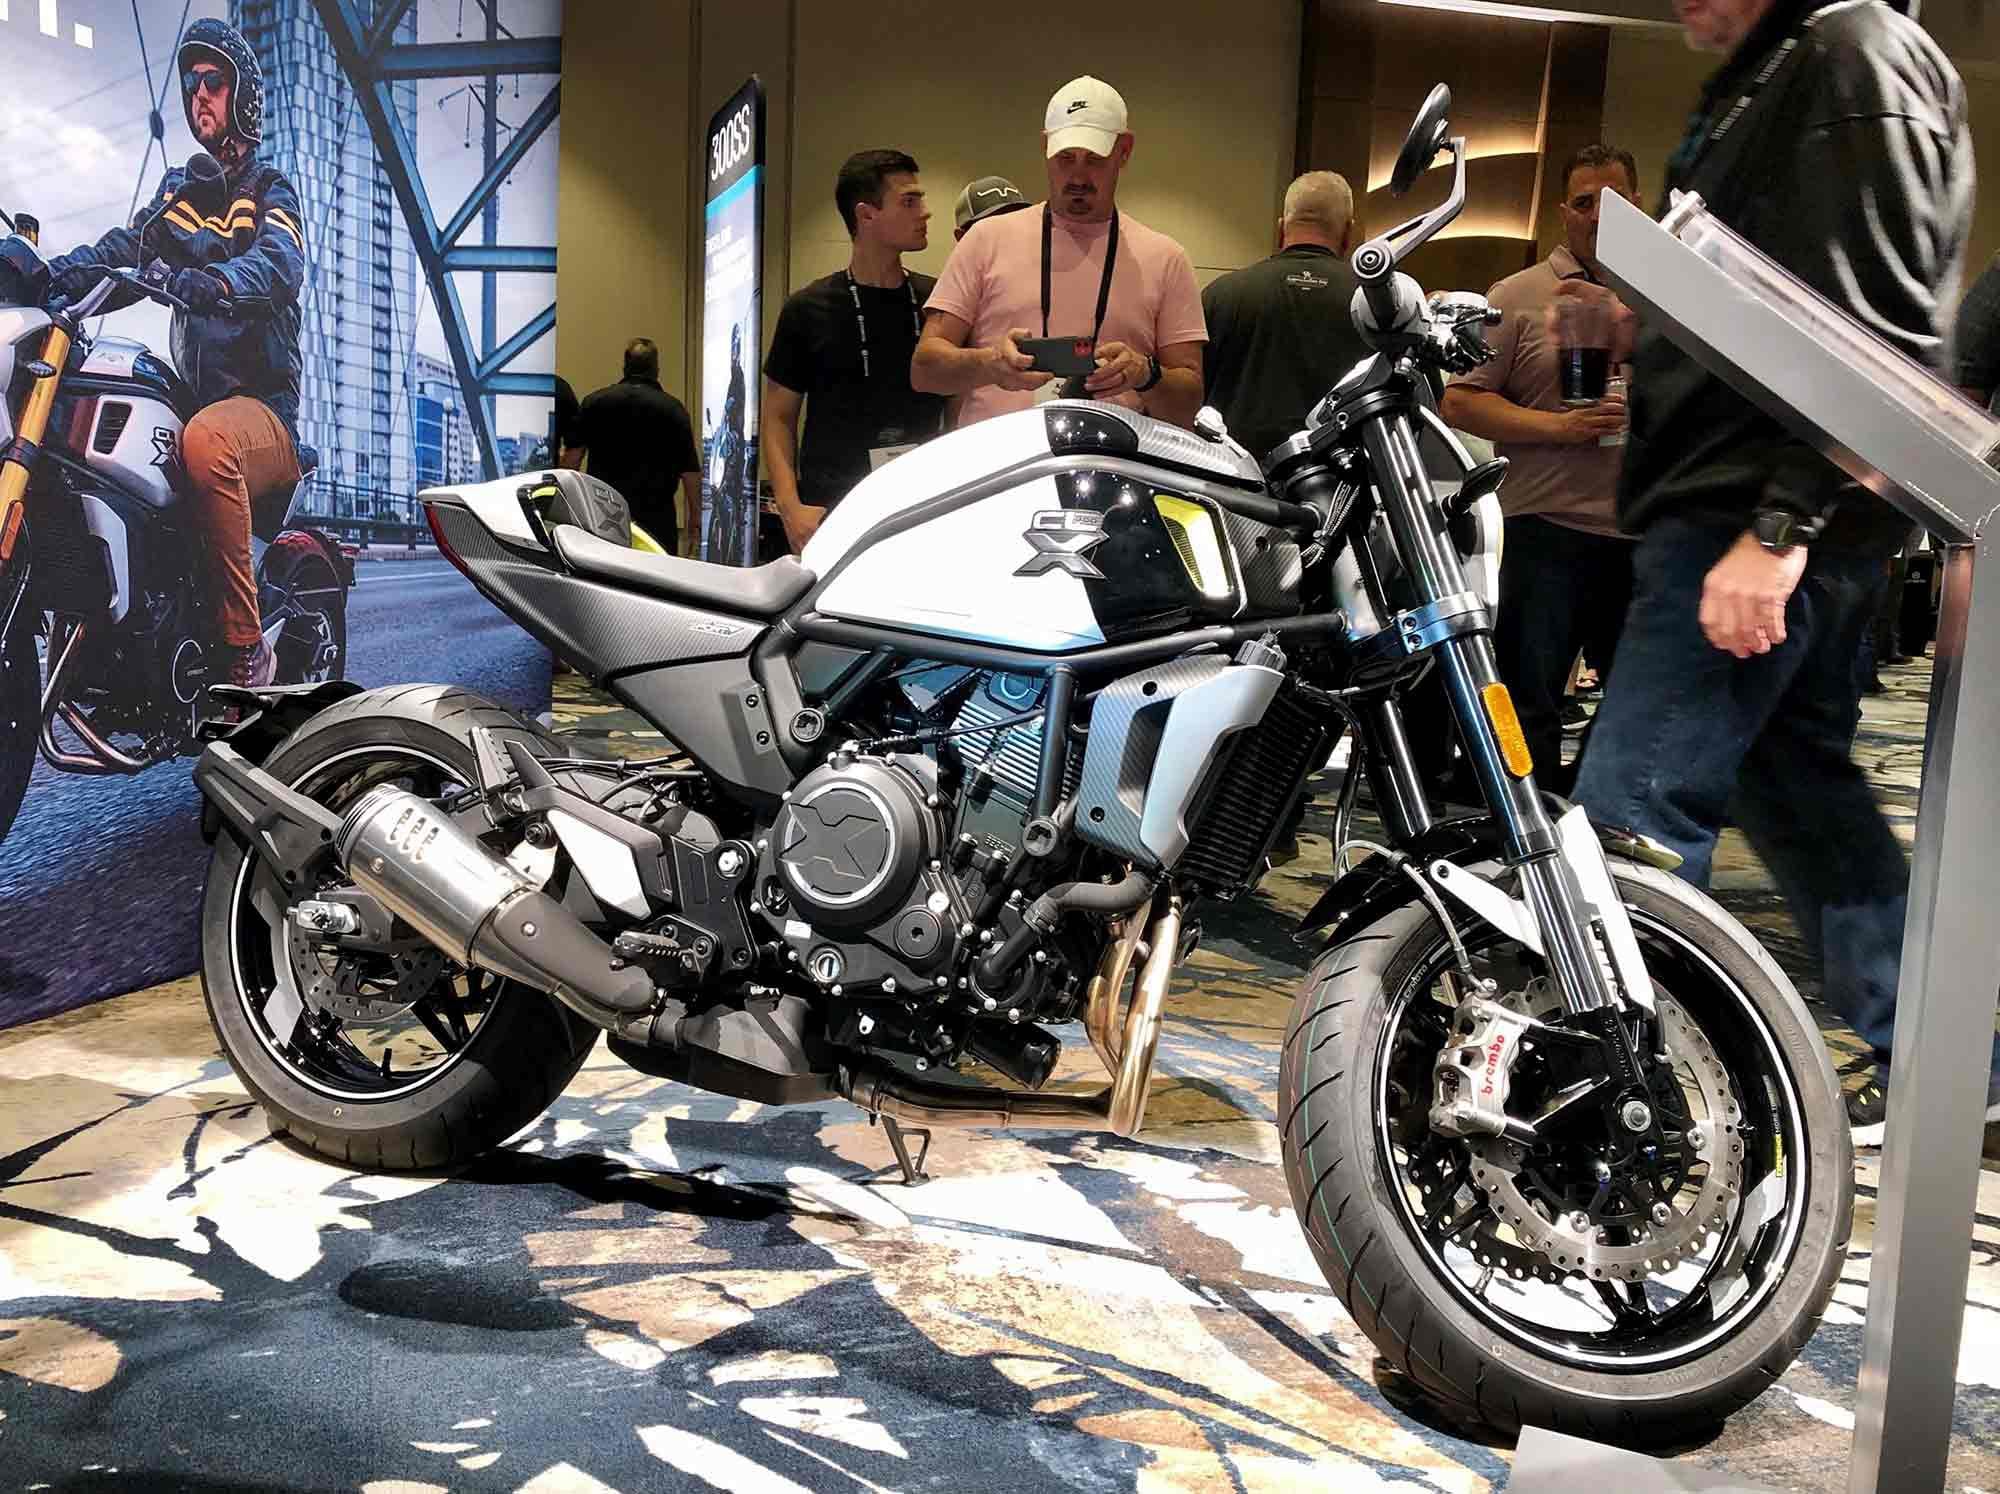 The US will also get the up-spec 700CL-X Sport version, which gets a solo seat, clip-ons, and higher-spec Brembo Stylema brakes to go along with a slightly higher price tag.